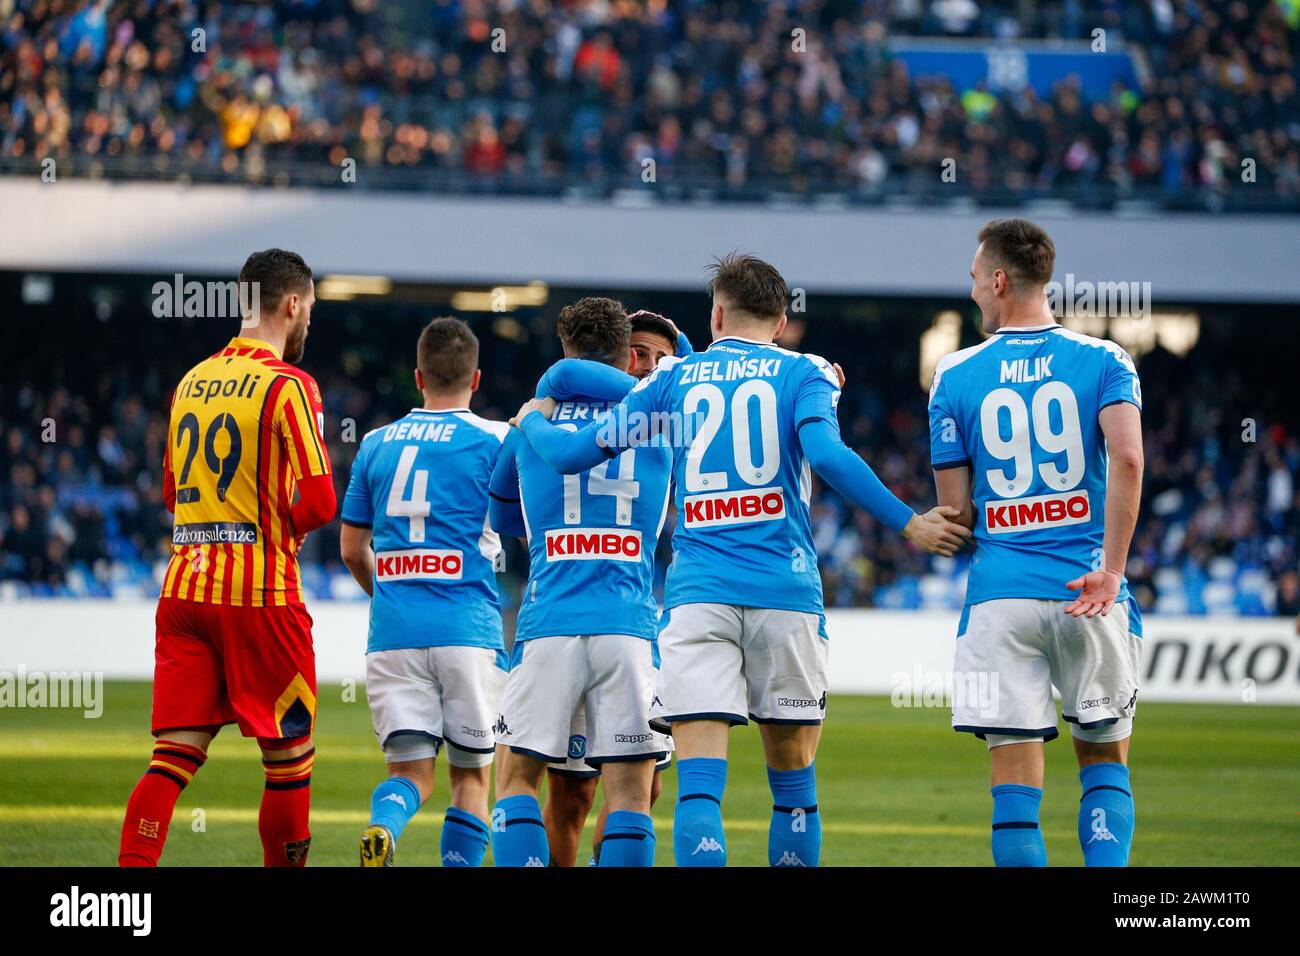 Naples, Campania, Italy. 9th Feb, 2020. During the Italian Serie A Football  match SSC Napoli vs Fc Lecce on February 09, 2020 at the San Paolo stadium  in Naples.In picture: MILIK Credit: